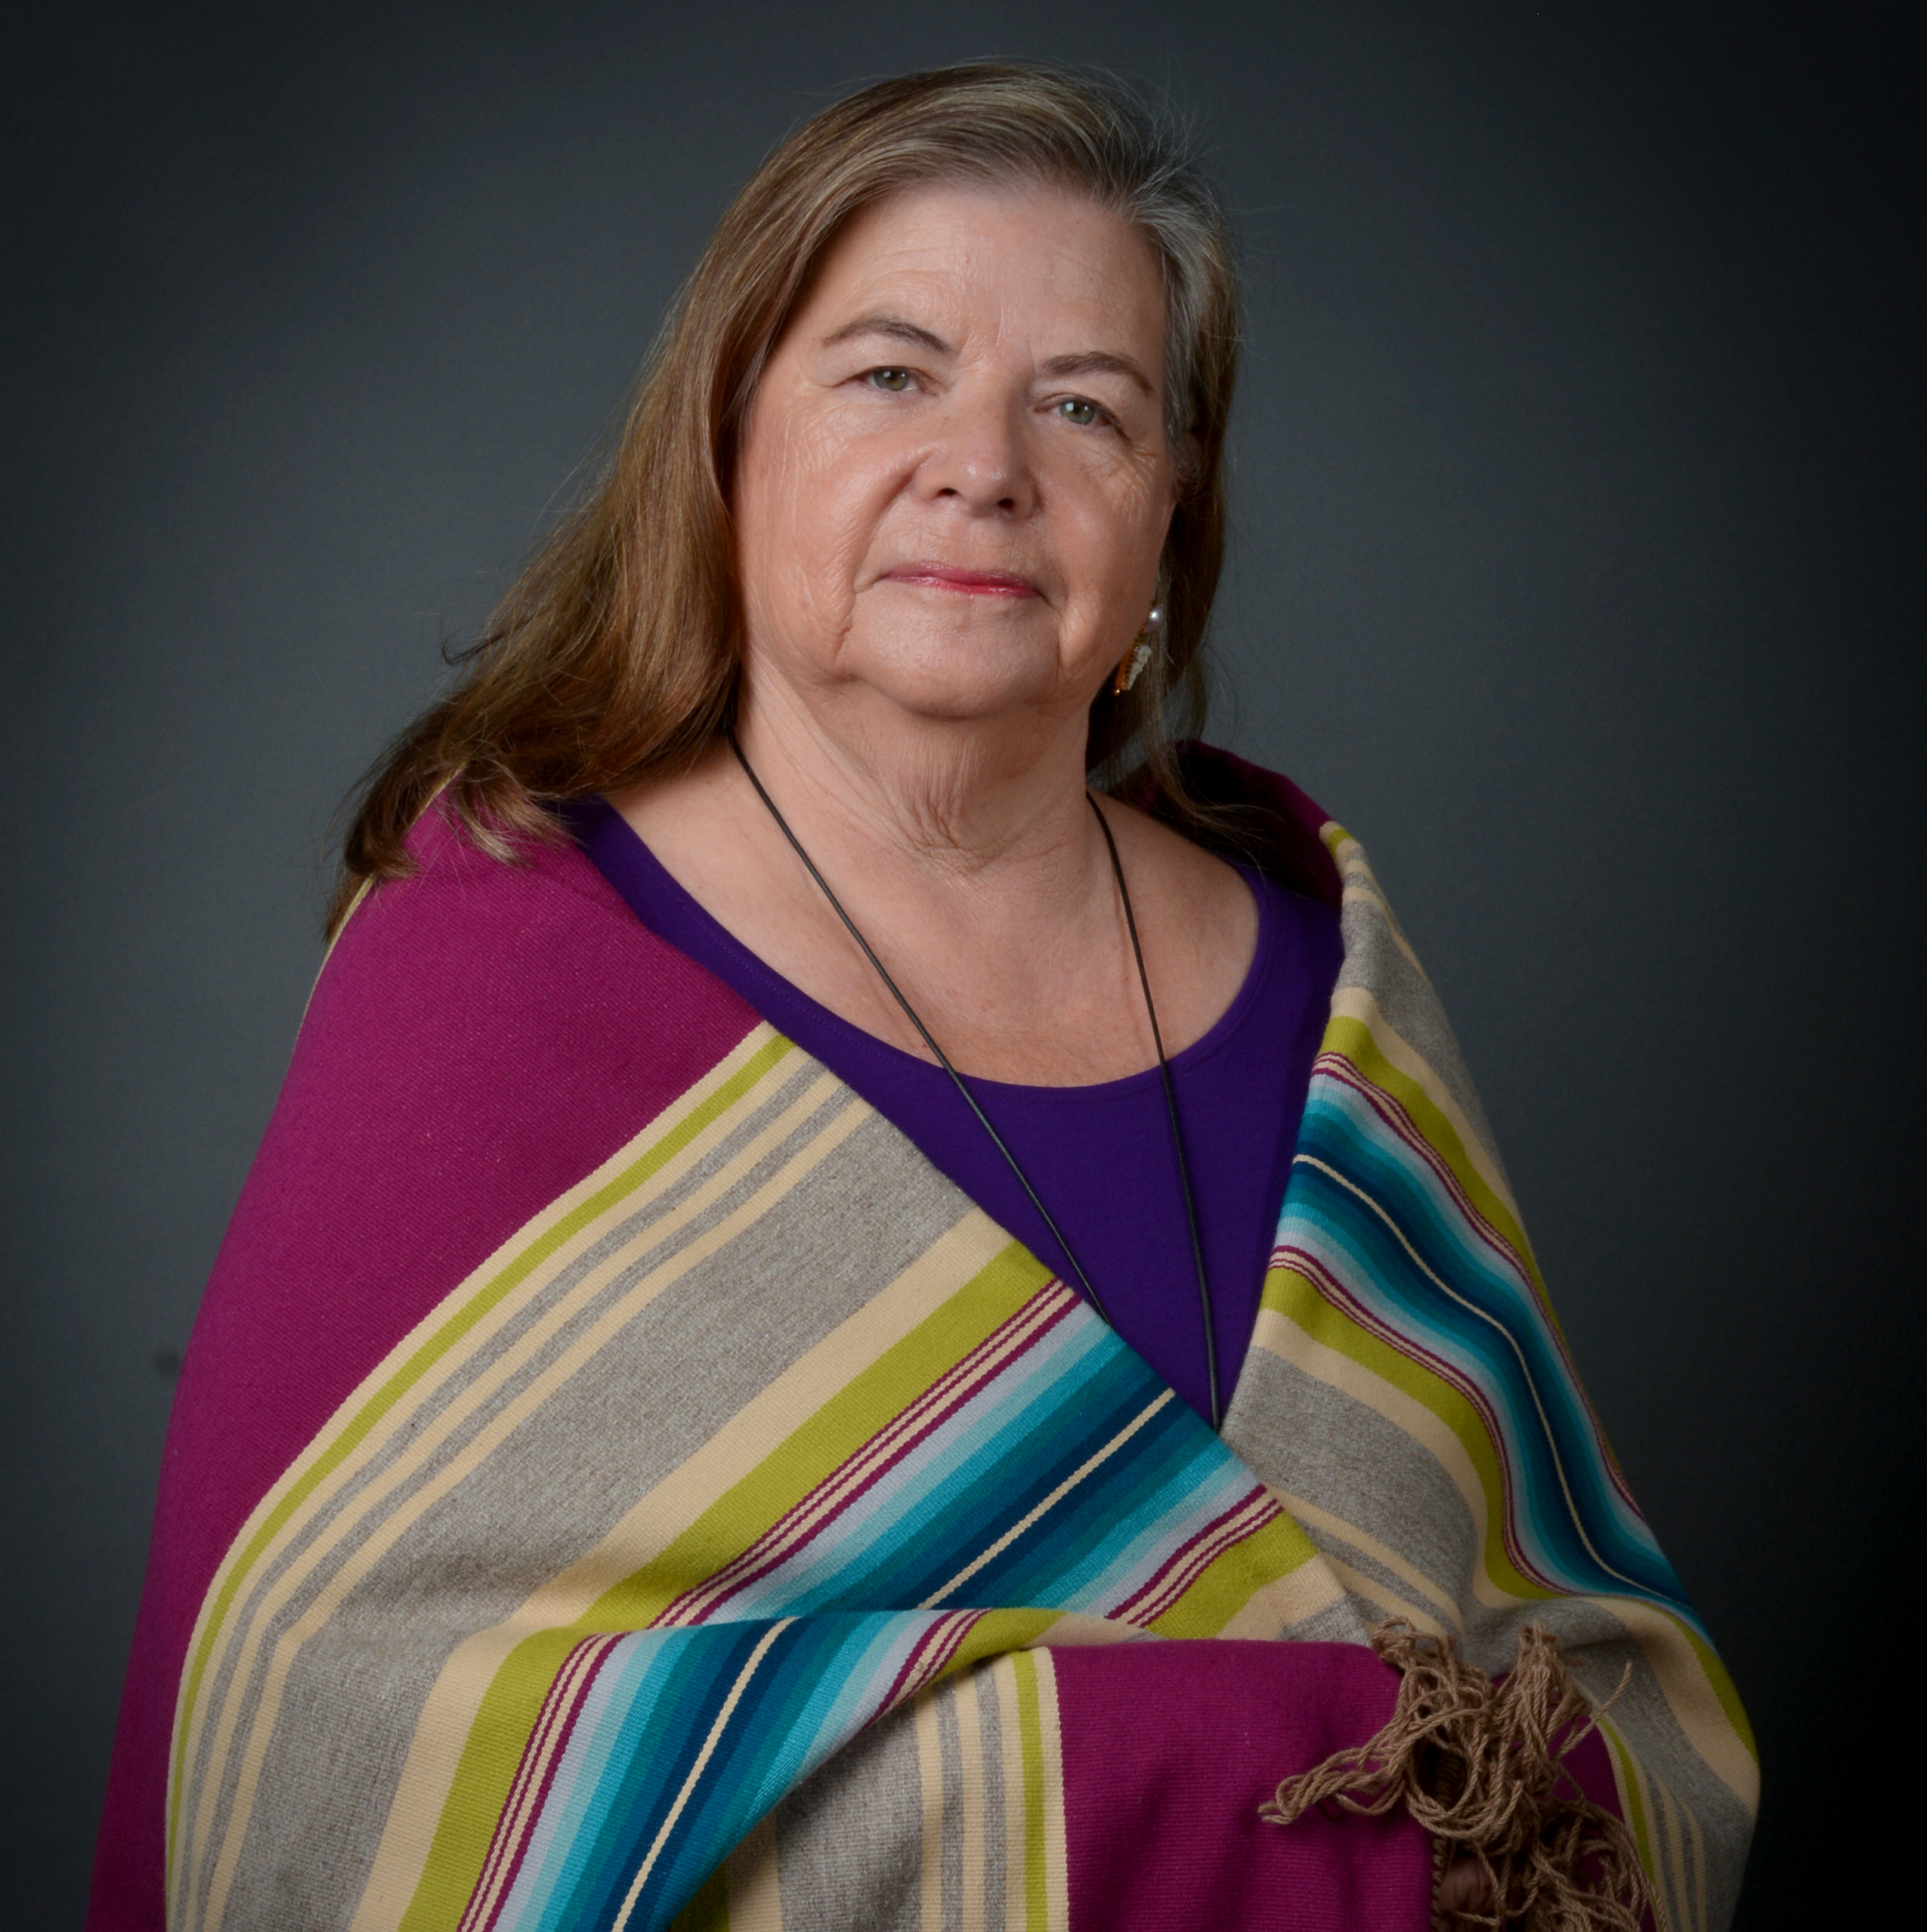 Woman with medium length brown hair wears a purple top and wraps herself in a Native American blanket with multi-colored stripes